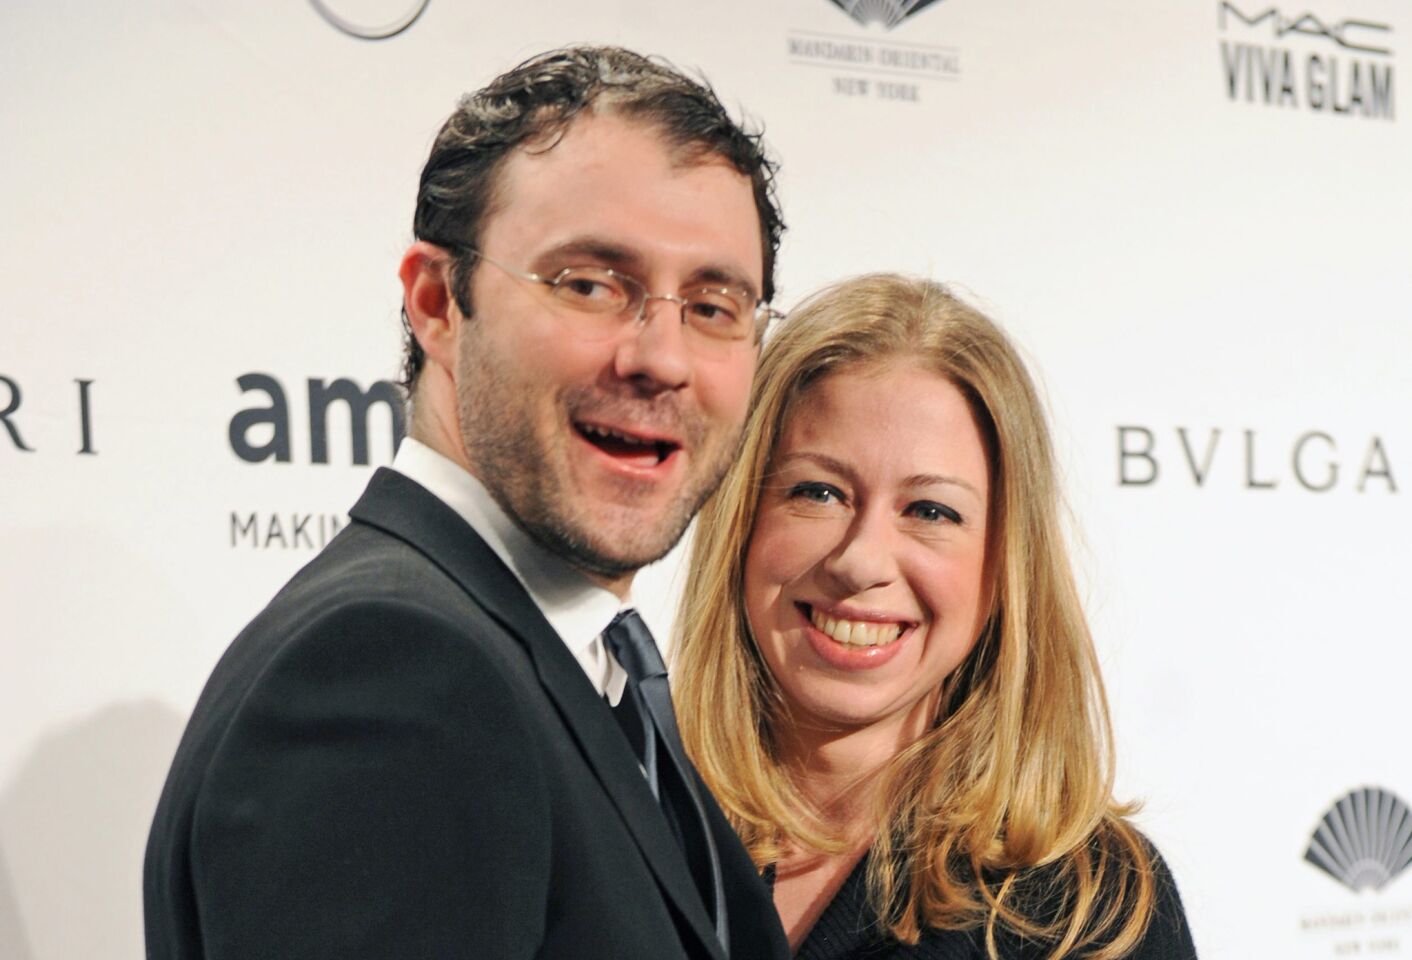 Chelsea Clinton and investment banker husband Marc Mezvinsky are now first-time parents to daughter Charlotte Clinton Mezvinsky, which means Bill and Hillary Clinton are now grandparents. The couple met as teens, got to know each other at Stanford University and married in 2010.